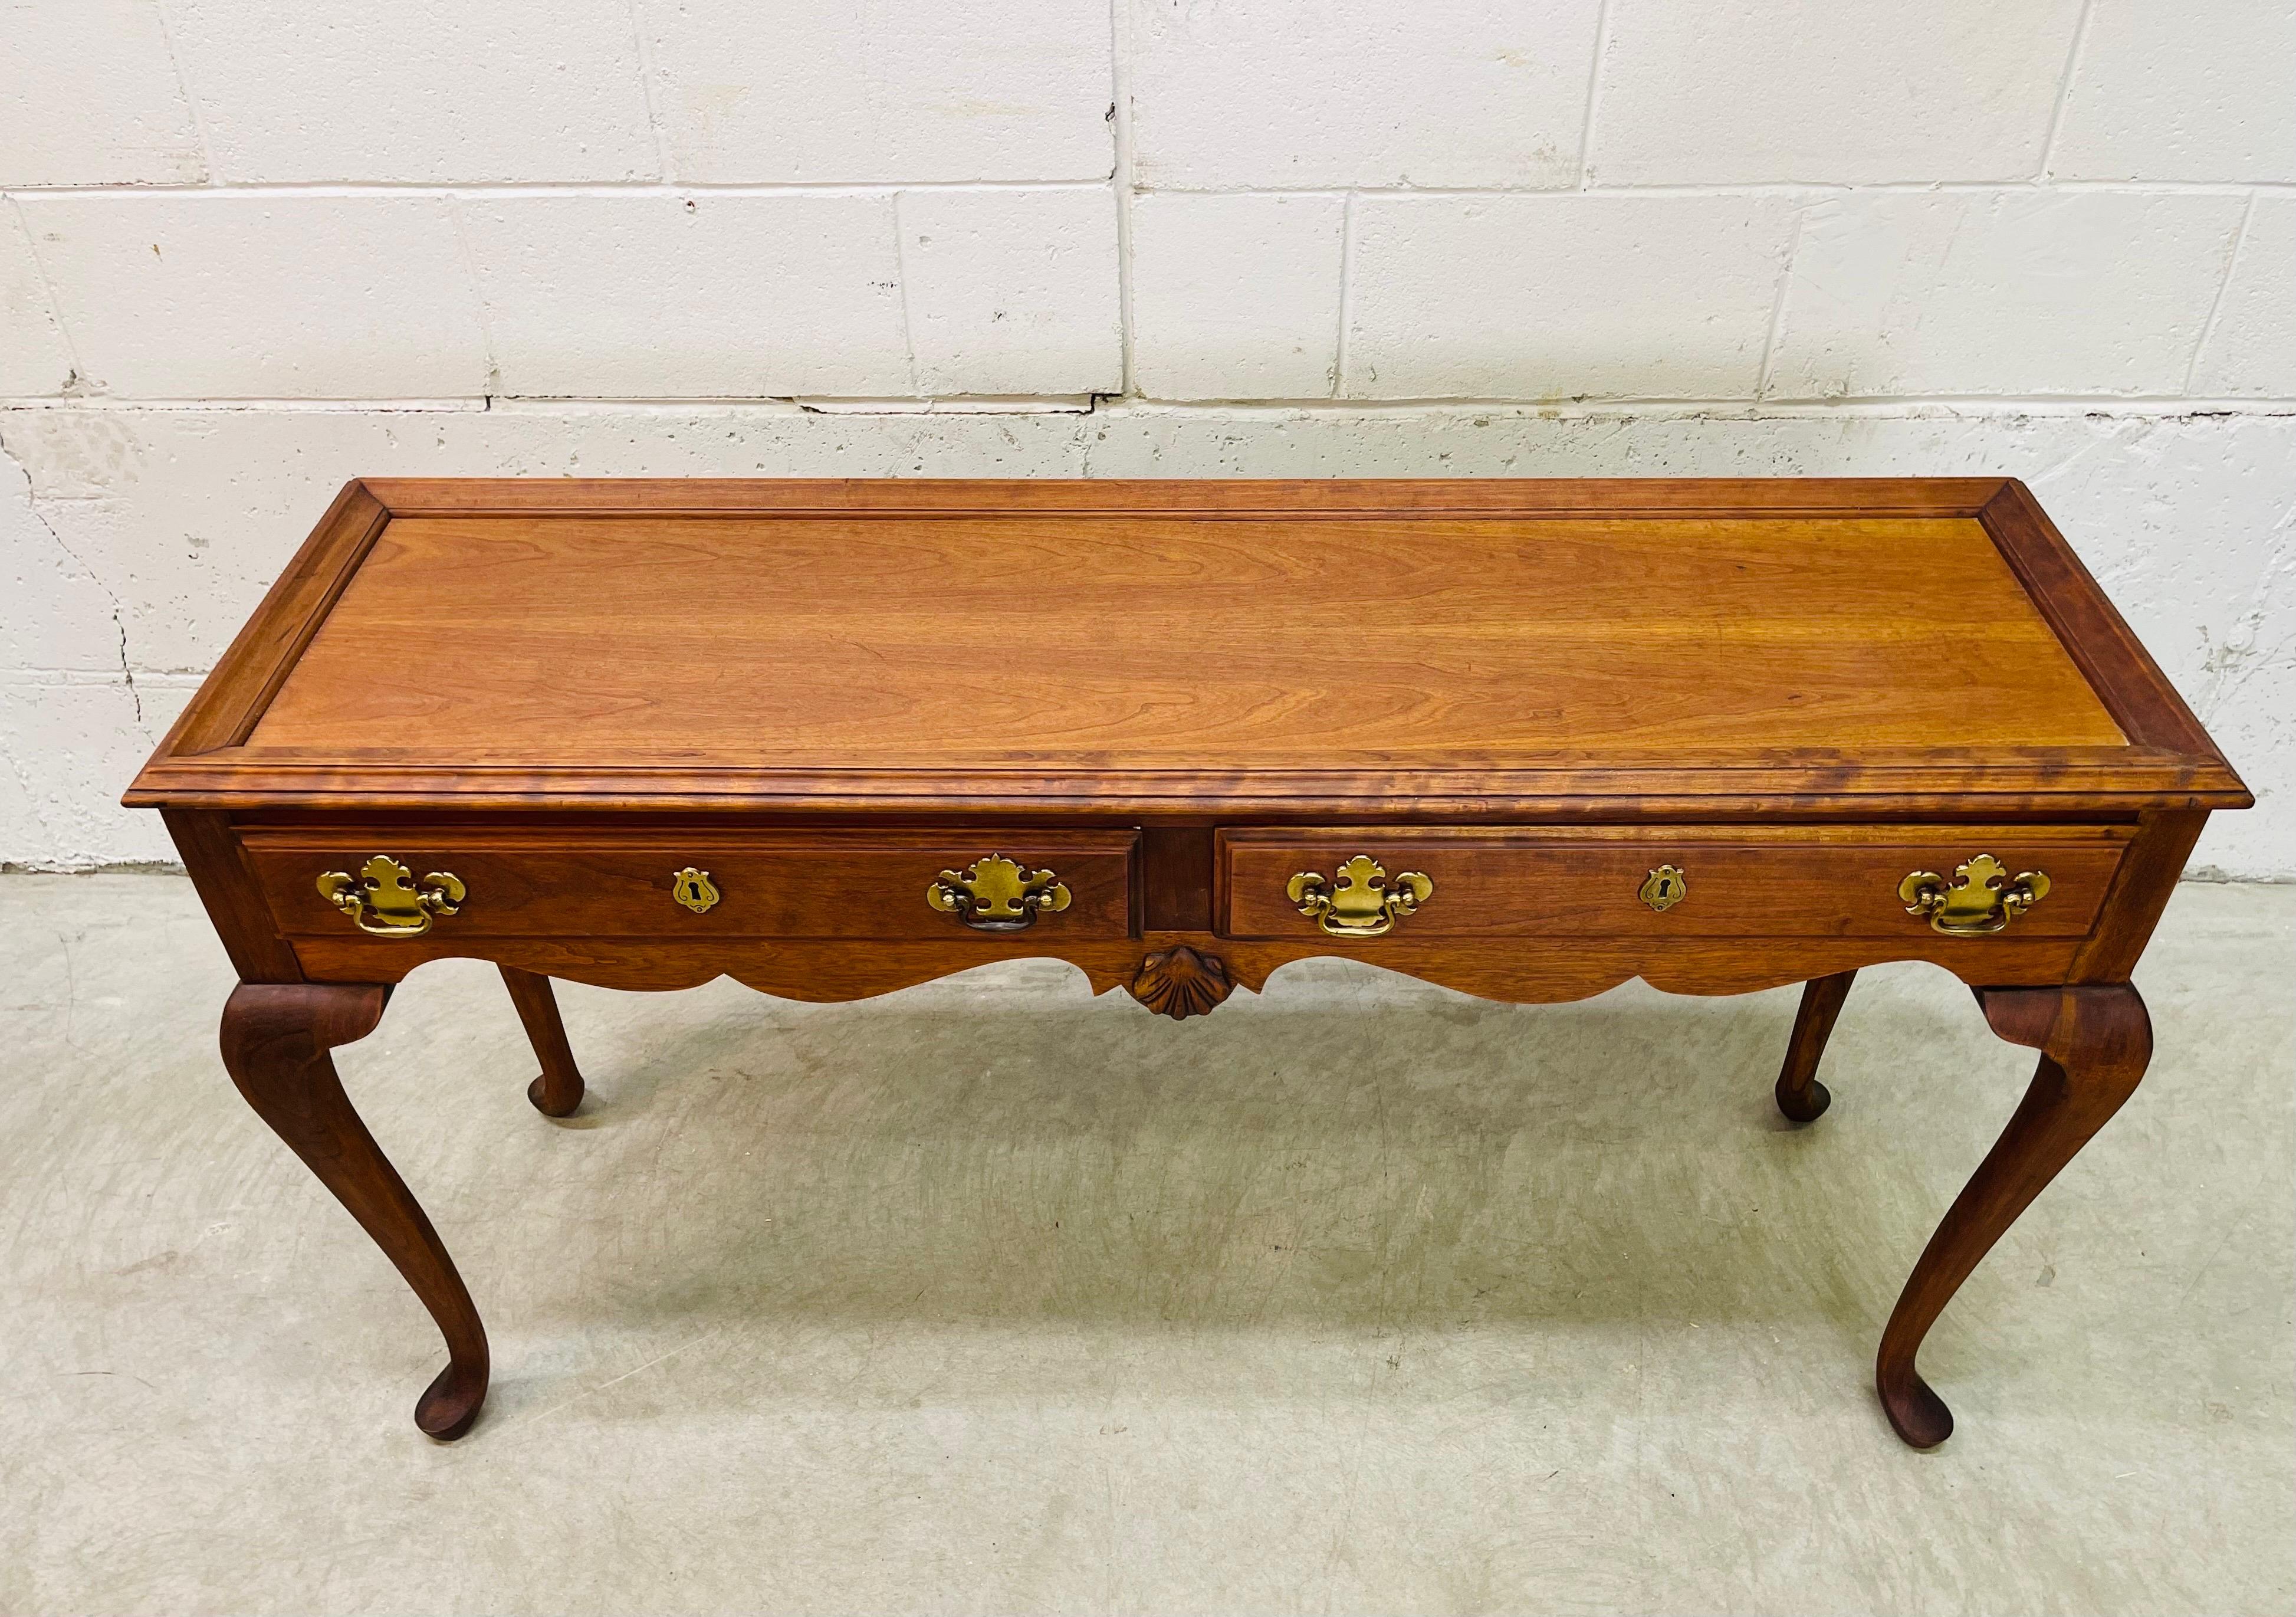 Vintage 1980s mahogany wood two drawer console table. The table has two drawers for storage and Queen Anne style cabriole legs. Back is finished and could be displayed. Brass brass pulls and key hole accents. Excellent refinished condition. No marks.